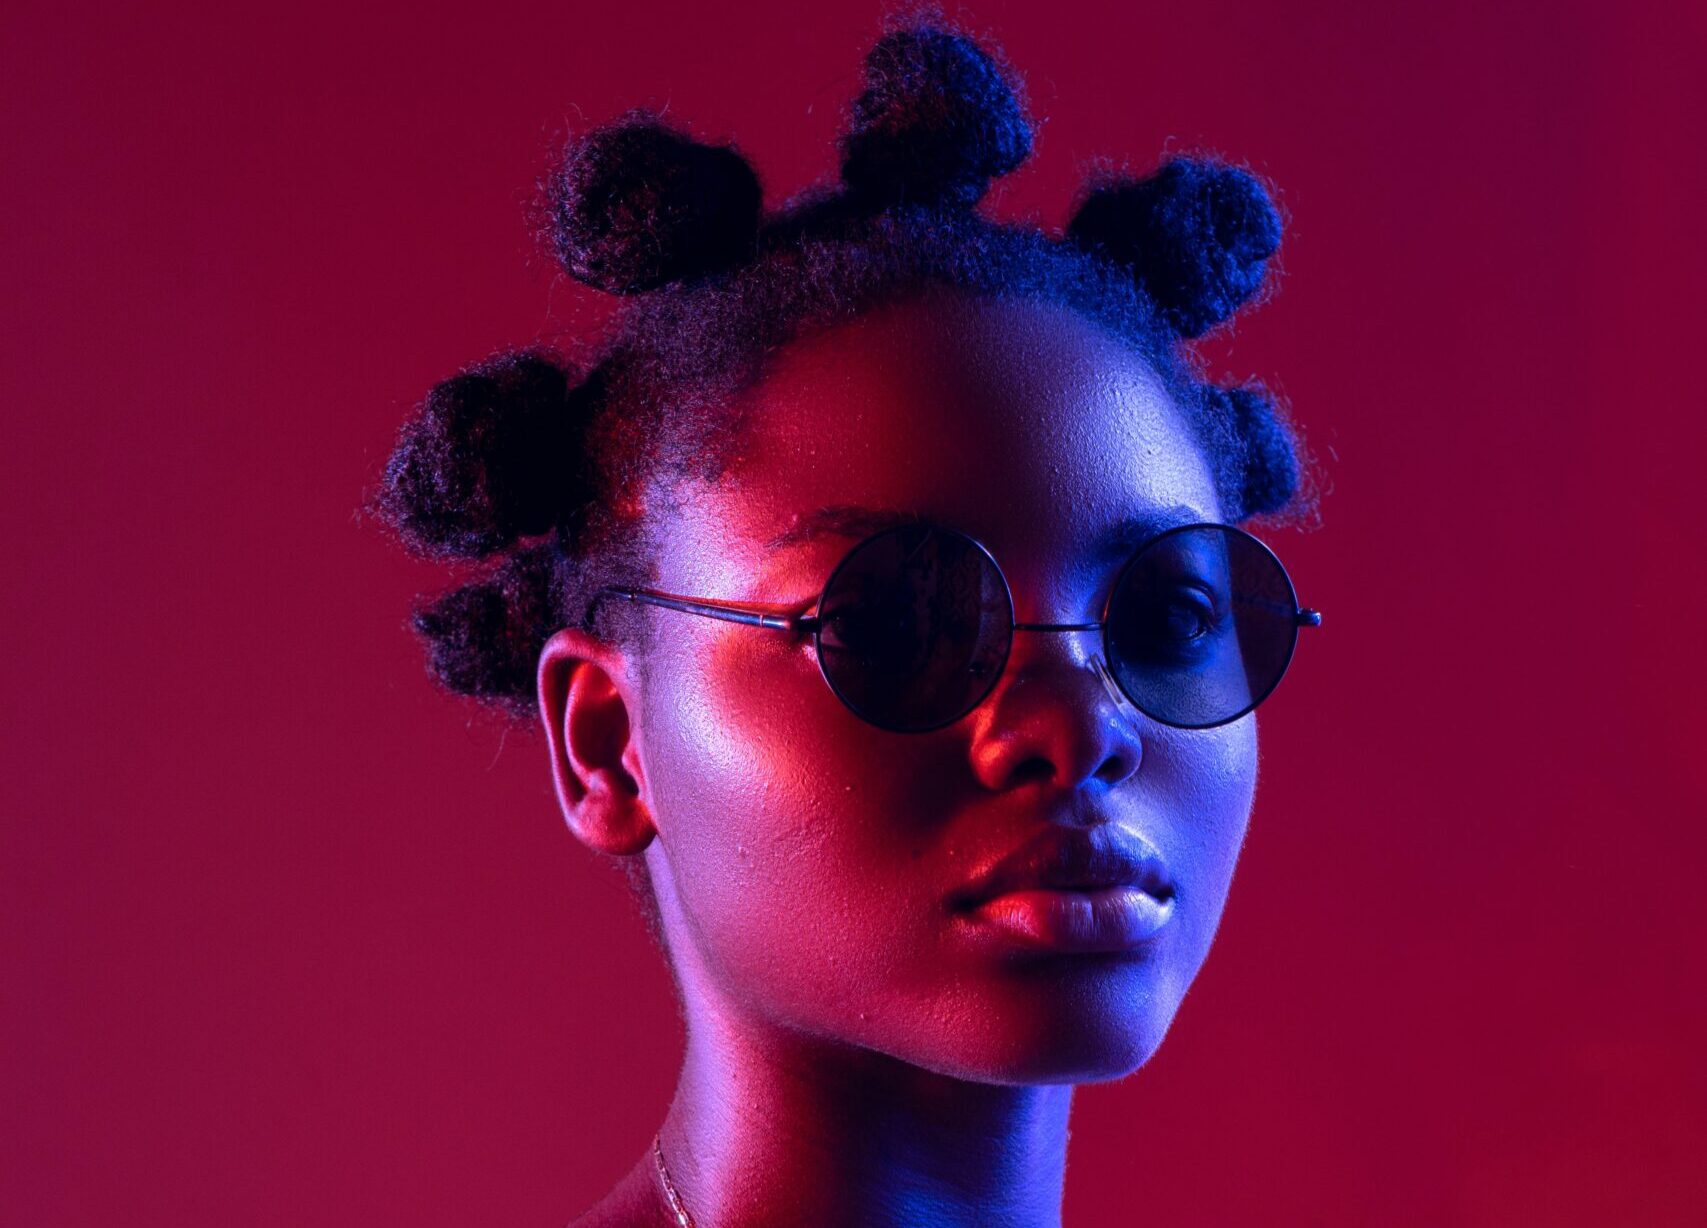 Canva Called Out Over Bantu Knot Hairstyle Being Labeled “Unsafe”